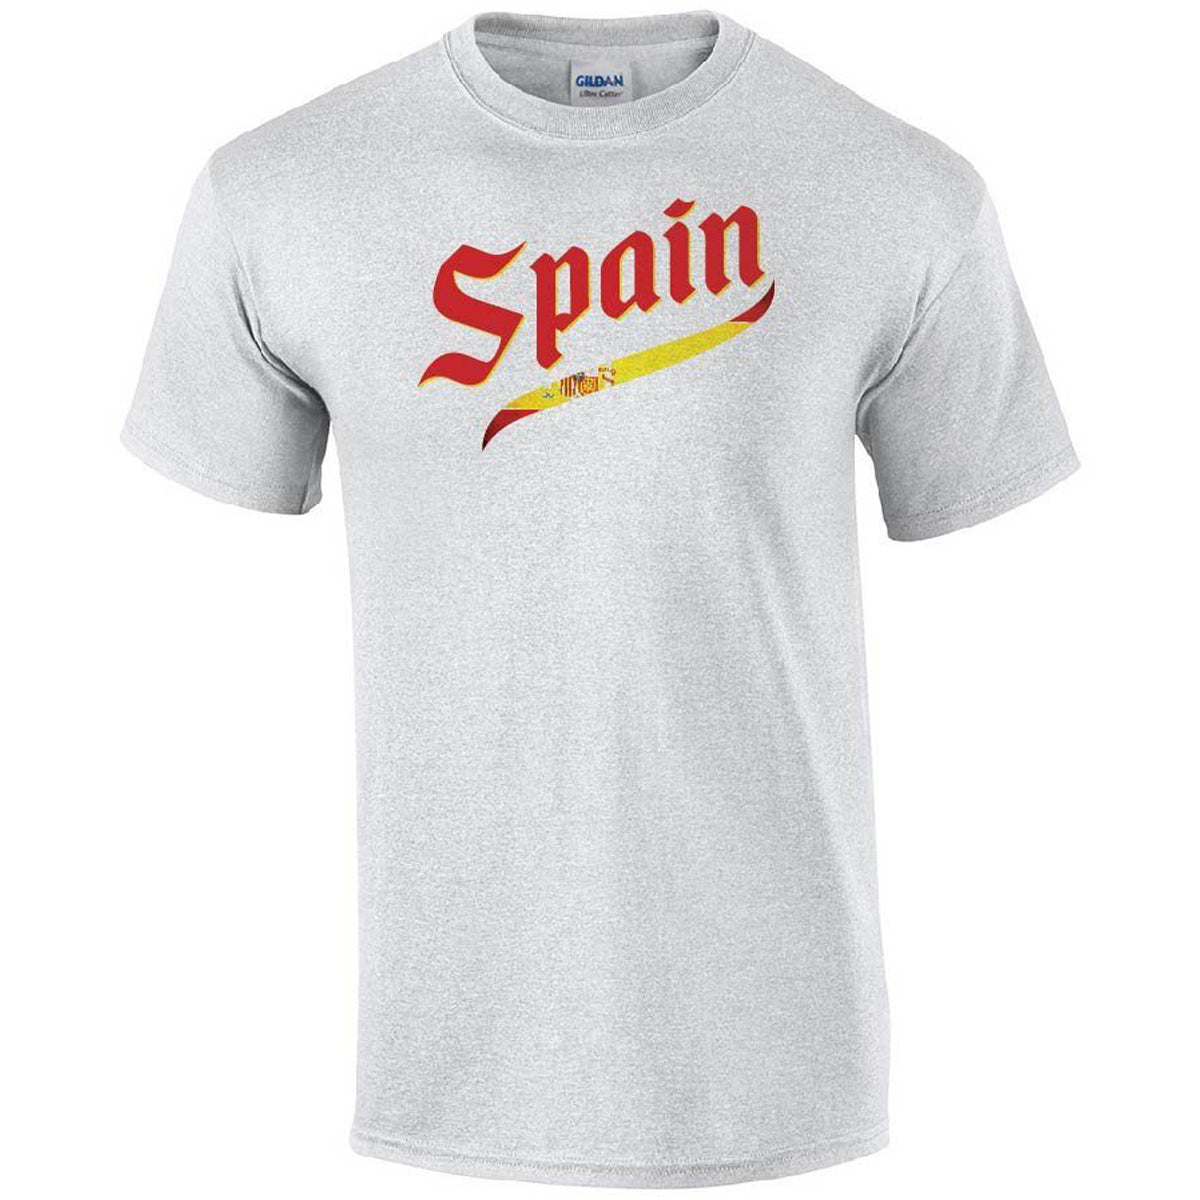 Spain Script World Cup 2022 Printed Tee T-shirts 411 Youth Medium Ash Youth